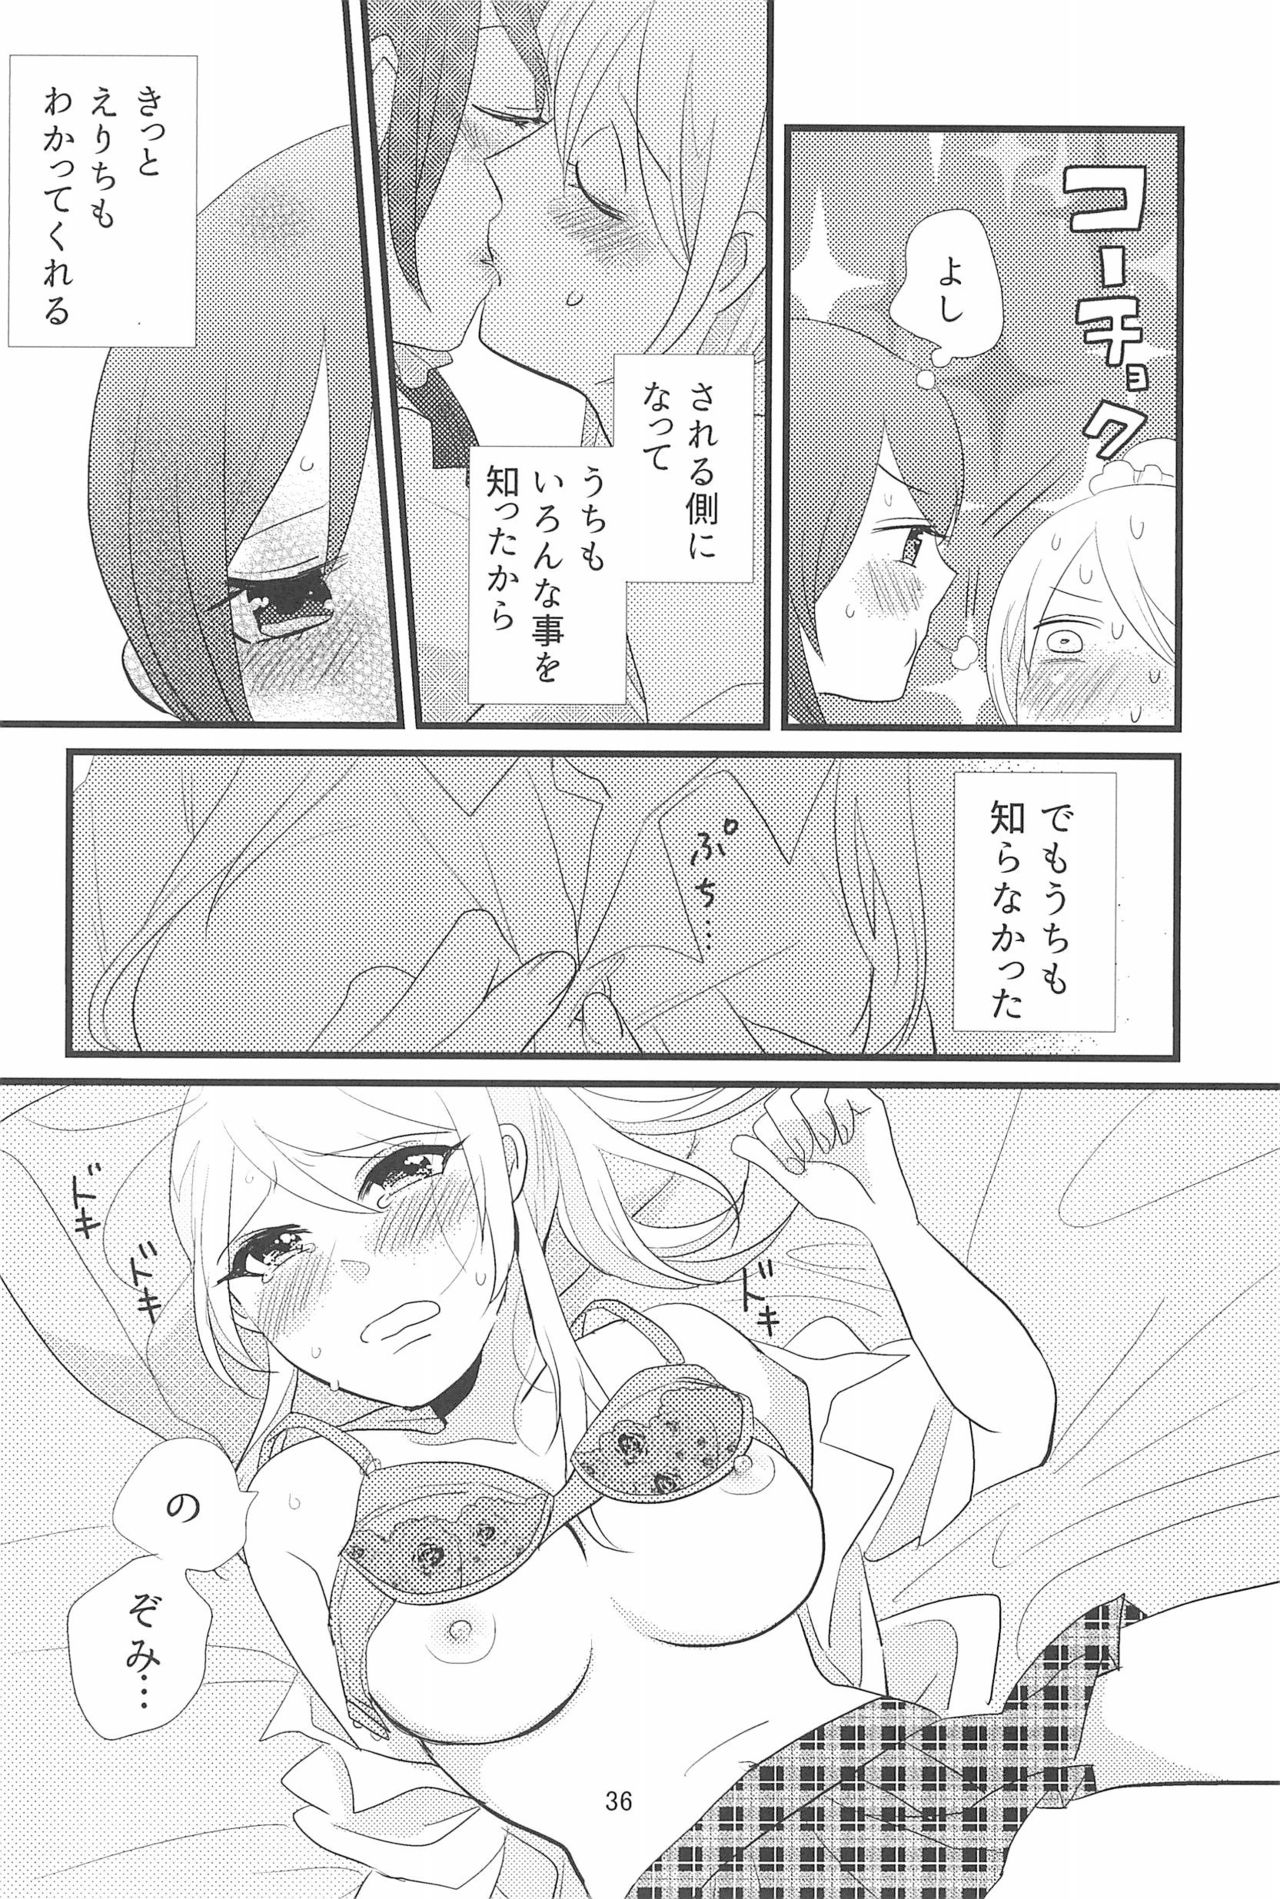 (C90) [BK*N2 (Mikawa Miso)] HAPPY GO LUCKY DAYS (Love Live!) page 40 full